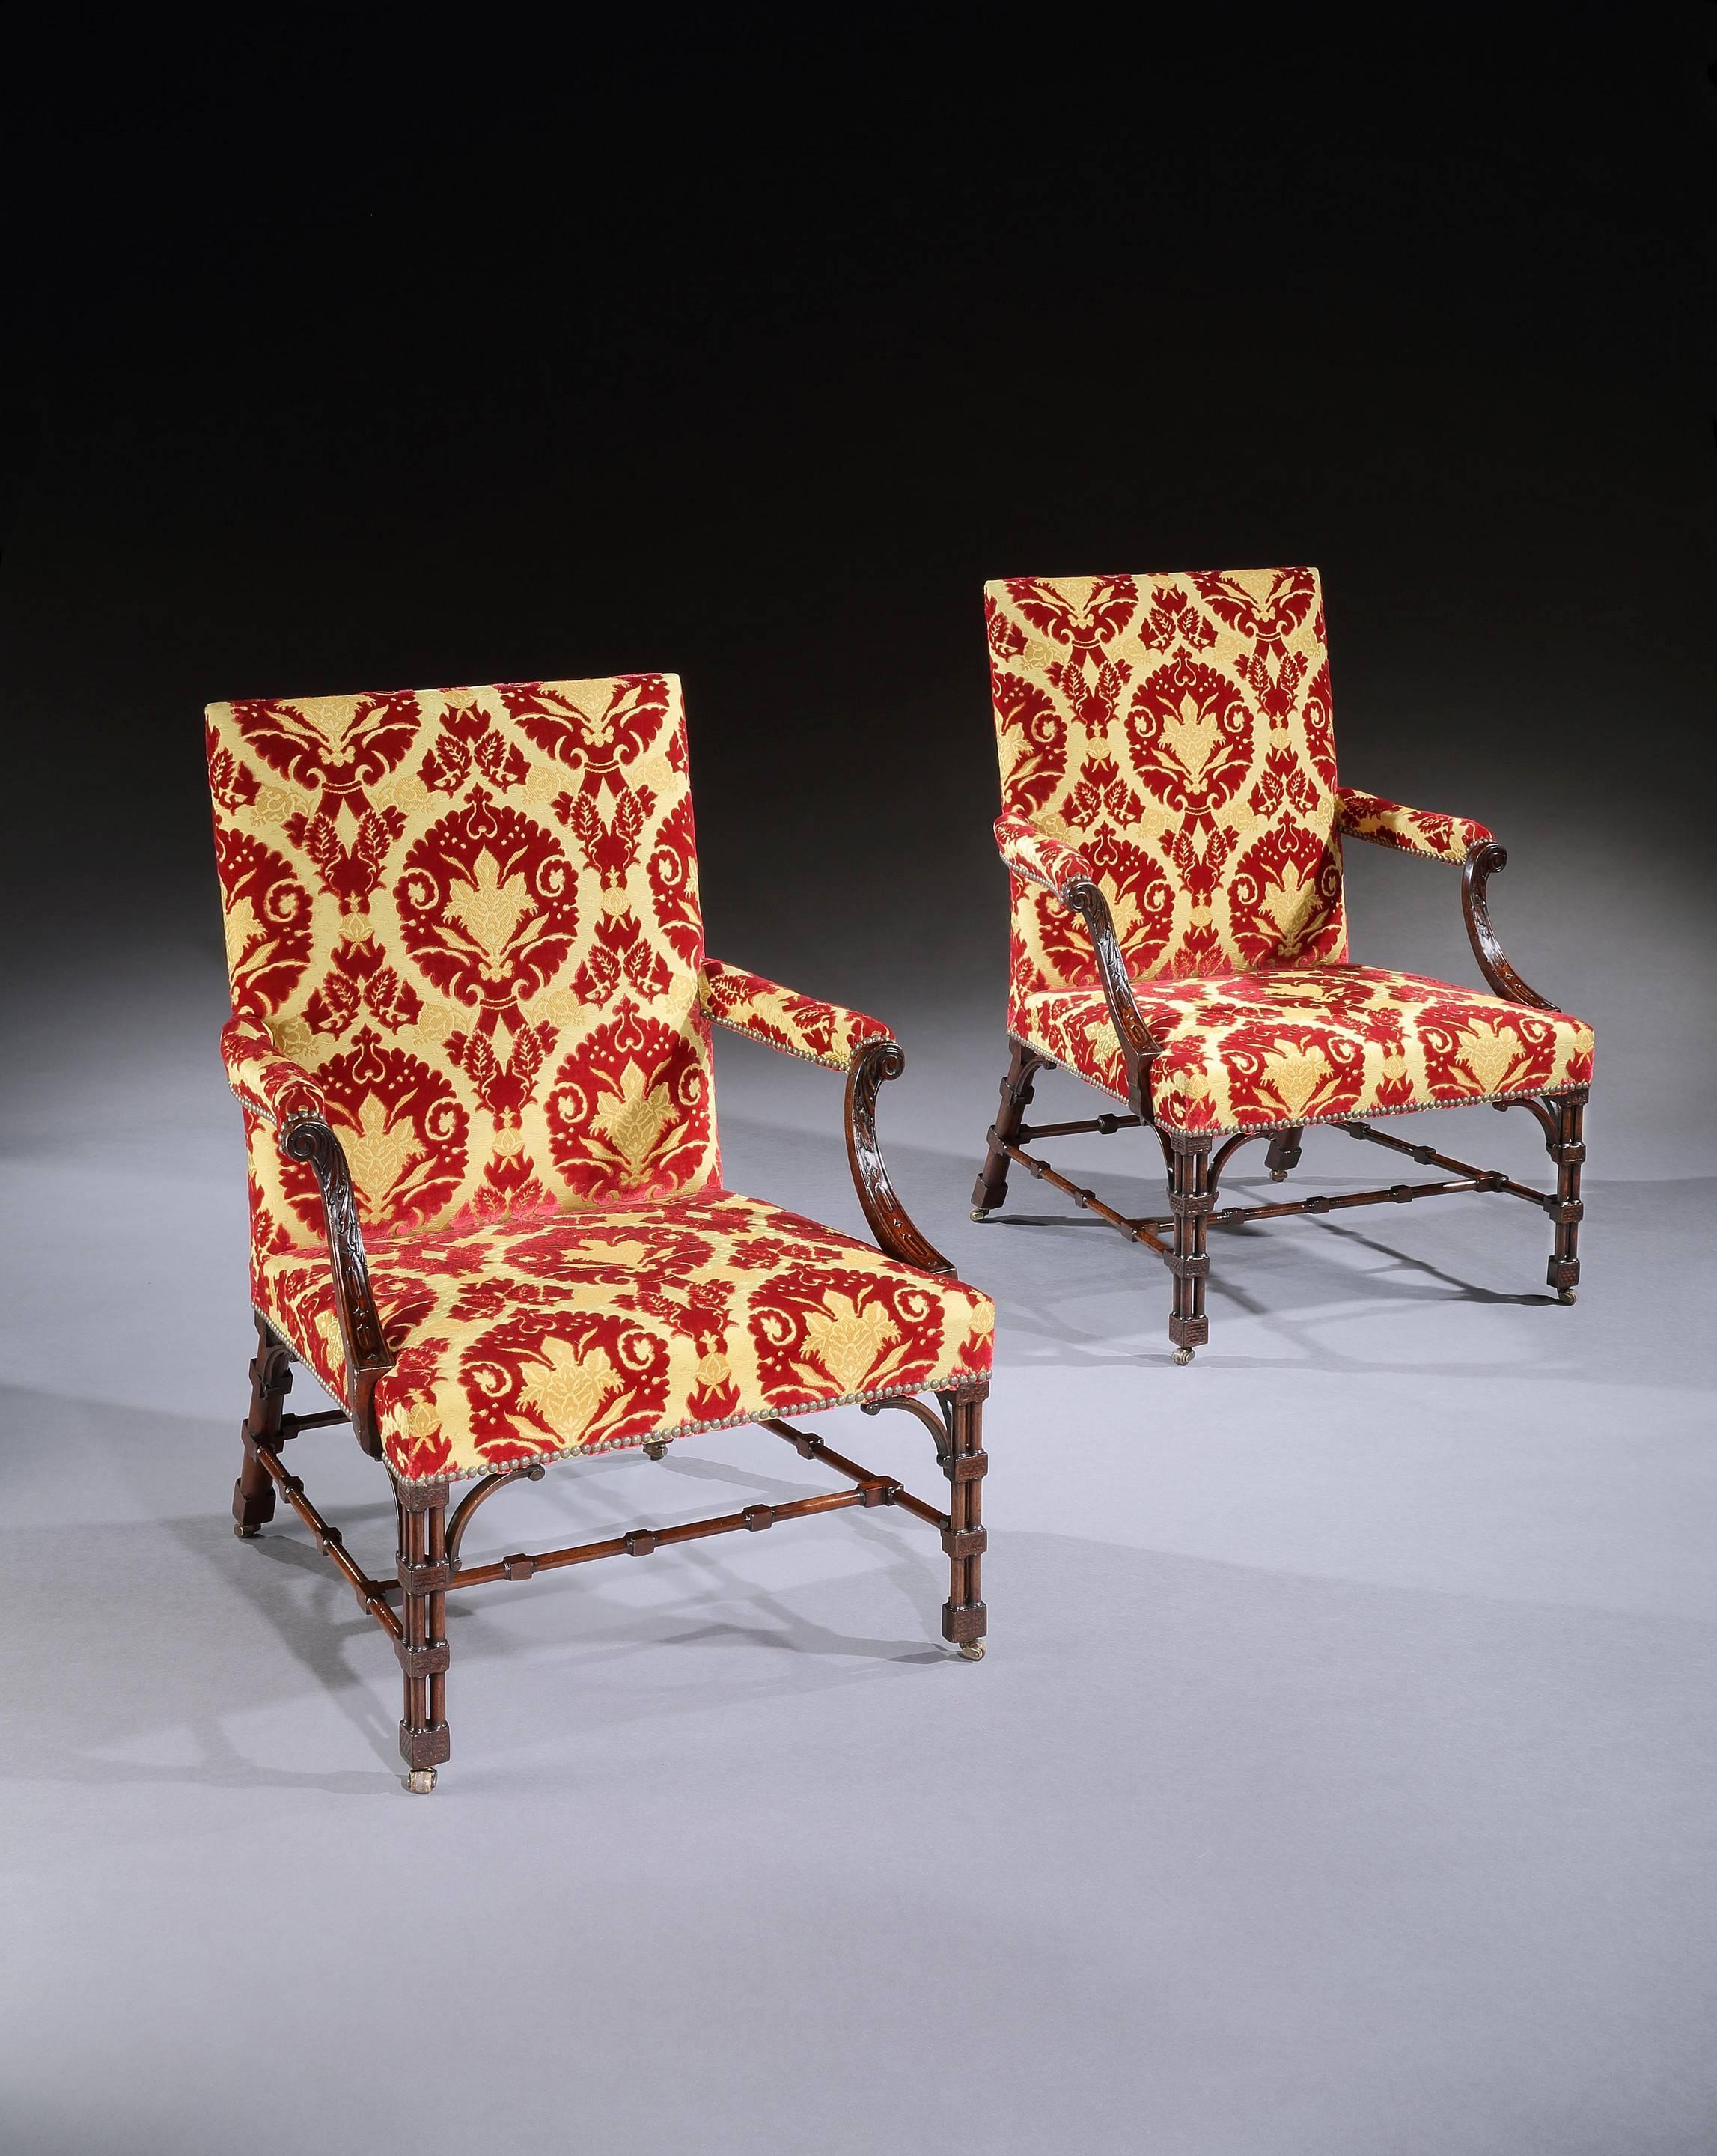 Two chairs retain a paper label inscribed ‘Earl Cowley’.

Cluster column legs are rarely found on library chairs and they give the overall design of these chairs a special lightness in appearance. Gillows of Lancaster made ‘Chinese’ chairs from